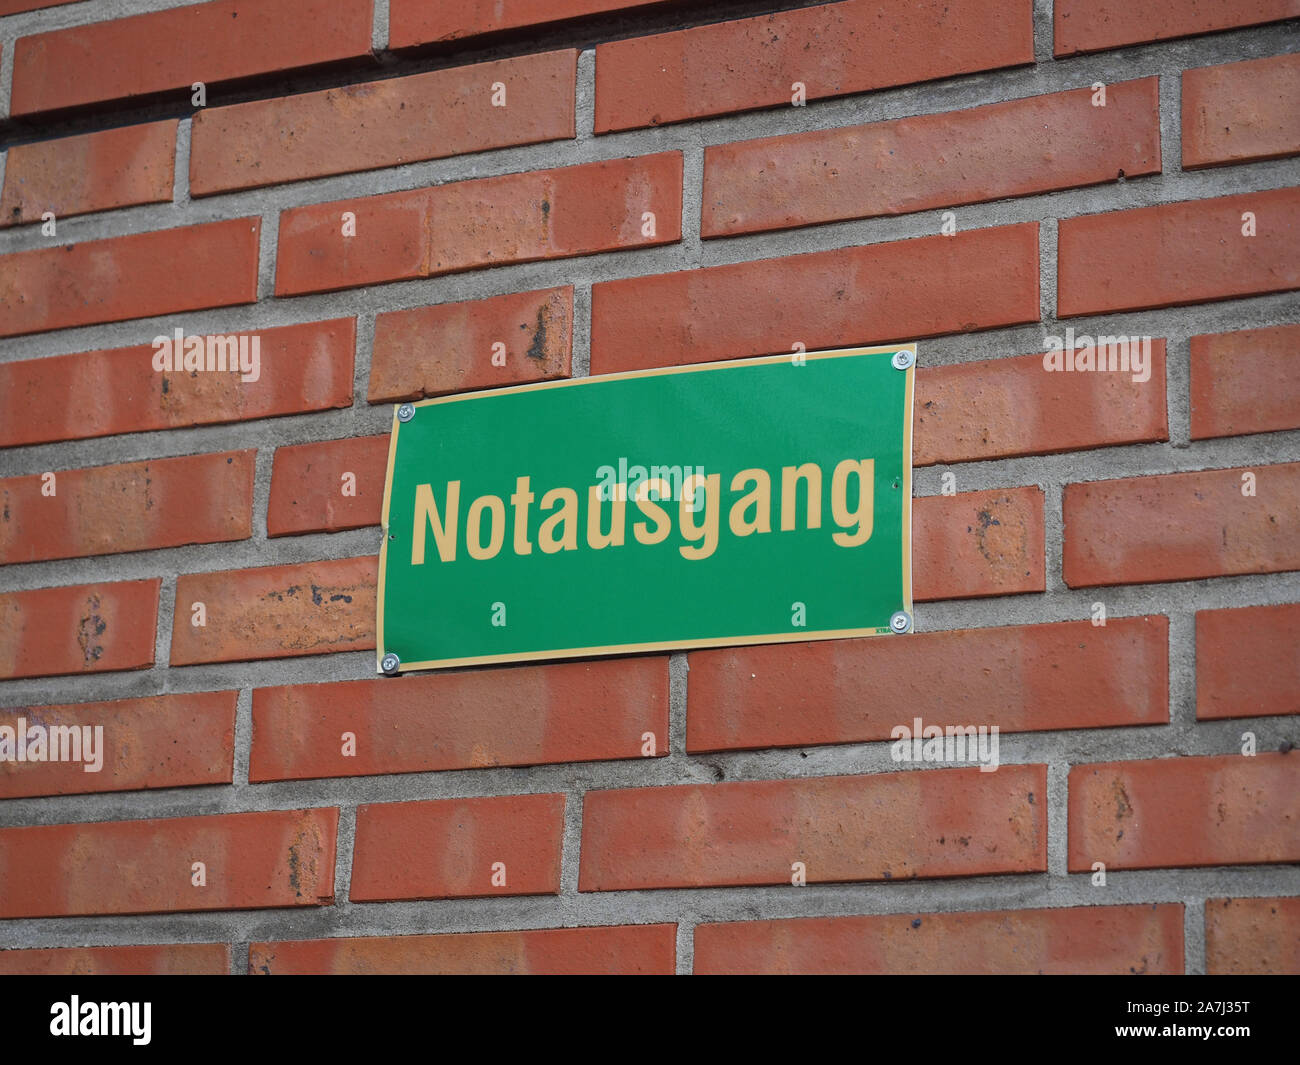 notausgang-meaning-emergency-exit-sign-on-red-brick-wall-stock-photo